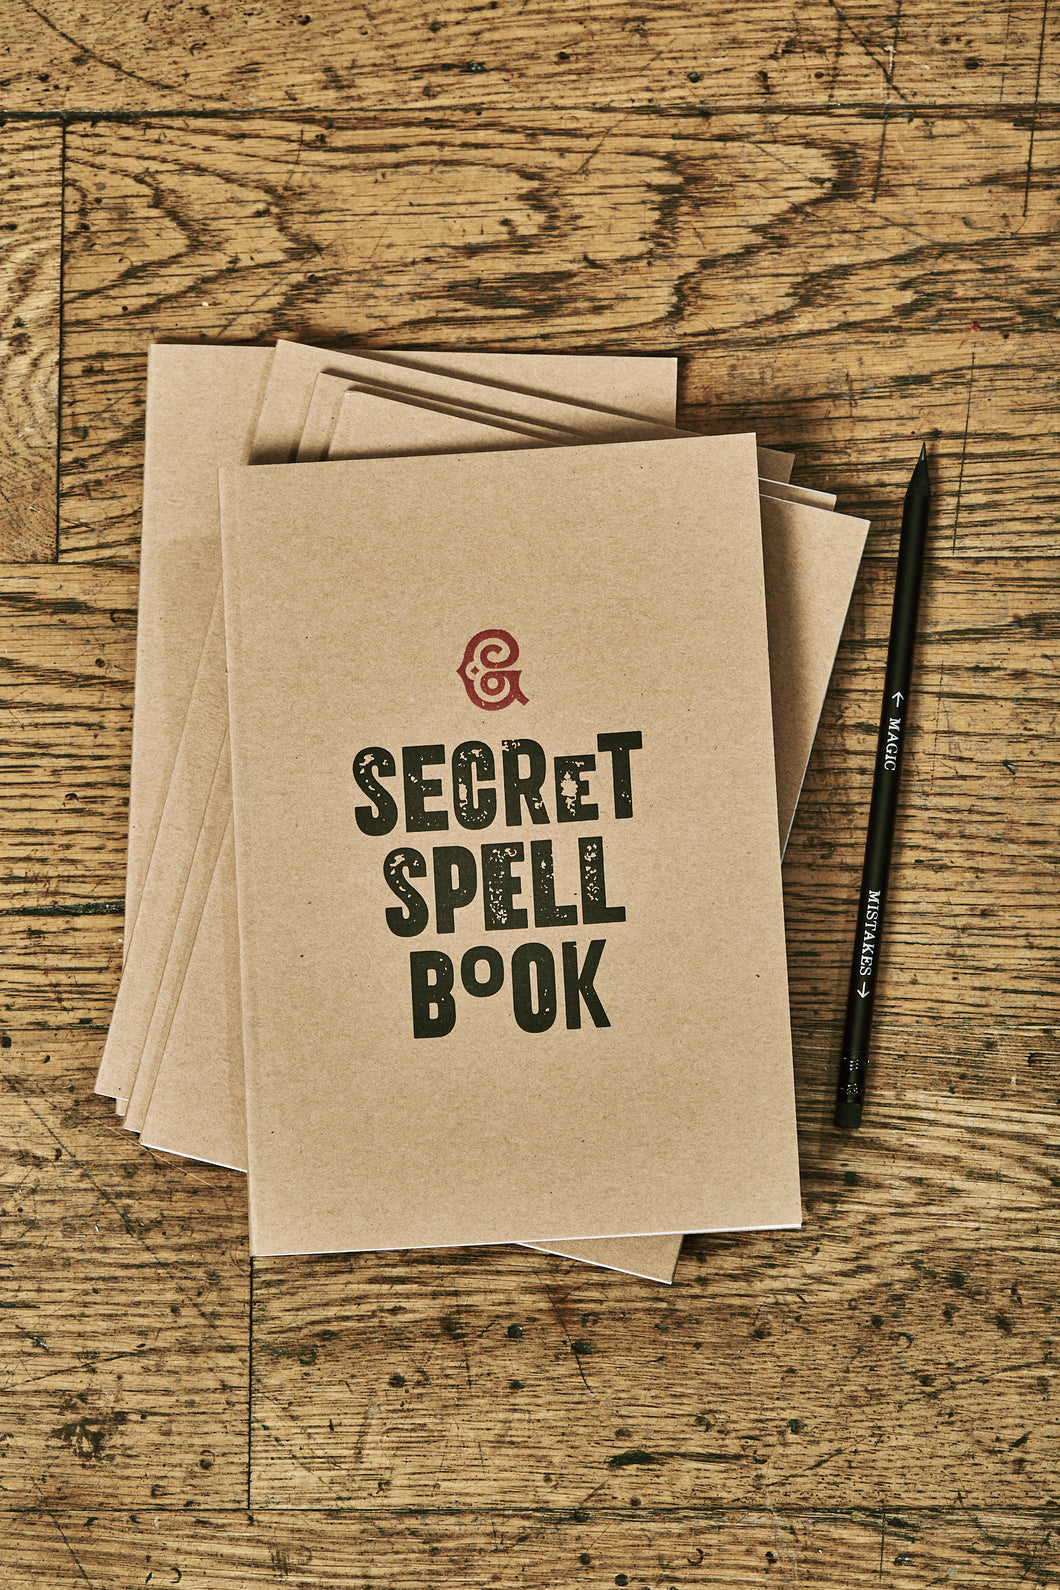 Image shows a few kraft card notebooks in a pile with the top one displaying the slogan 'SECRET SPELL BOOK'. Notebooks are shown with a Word Wand pencil.